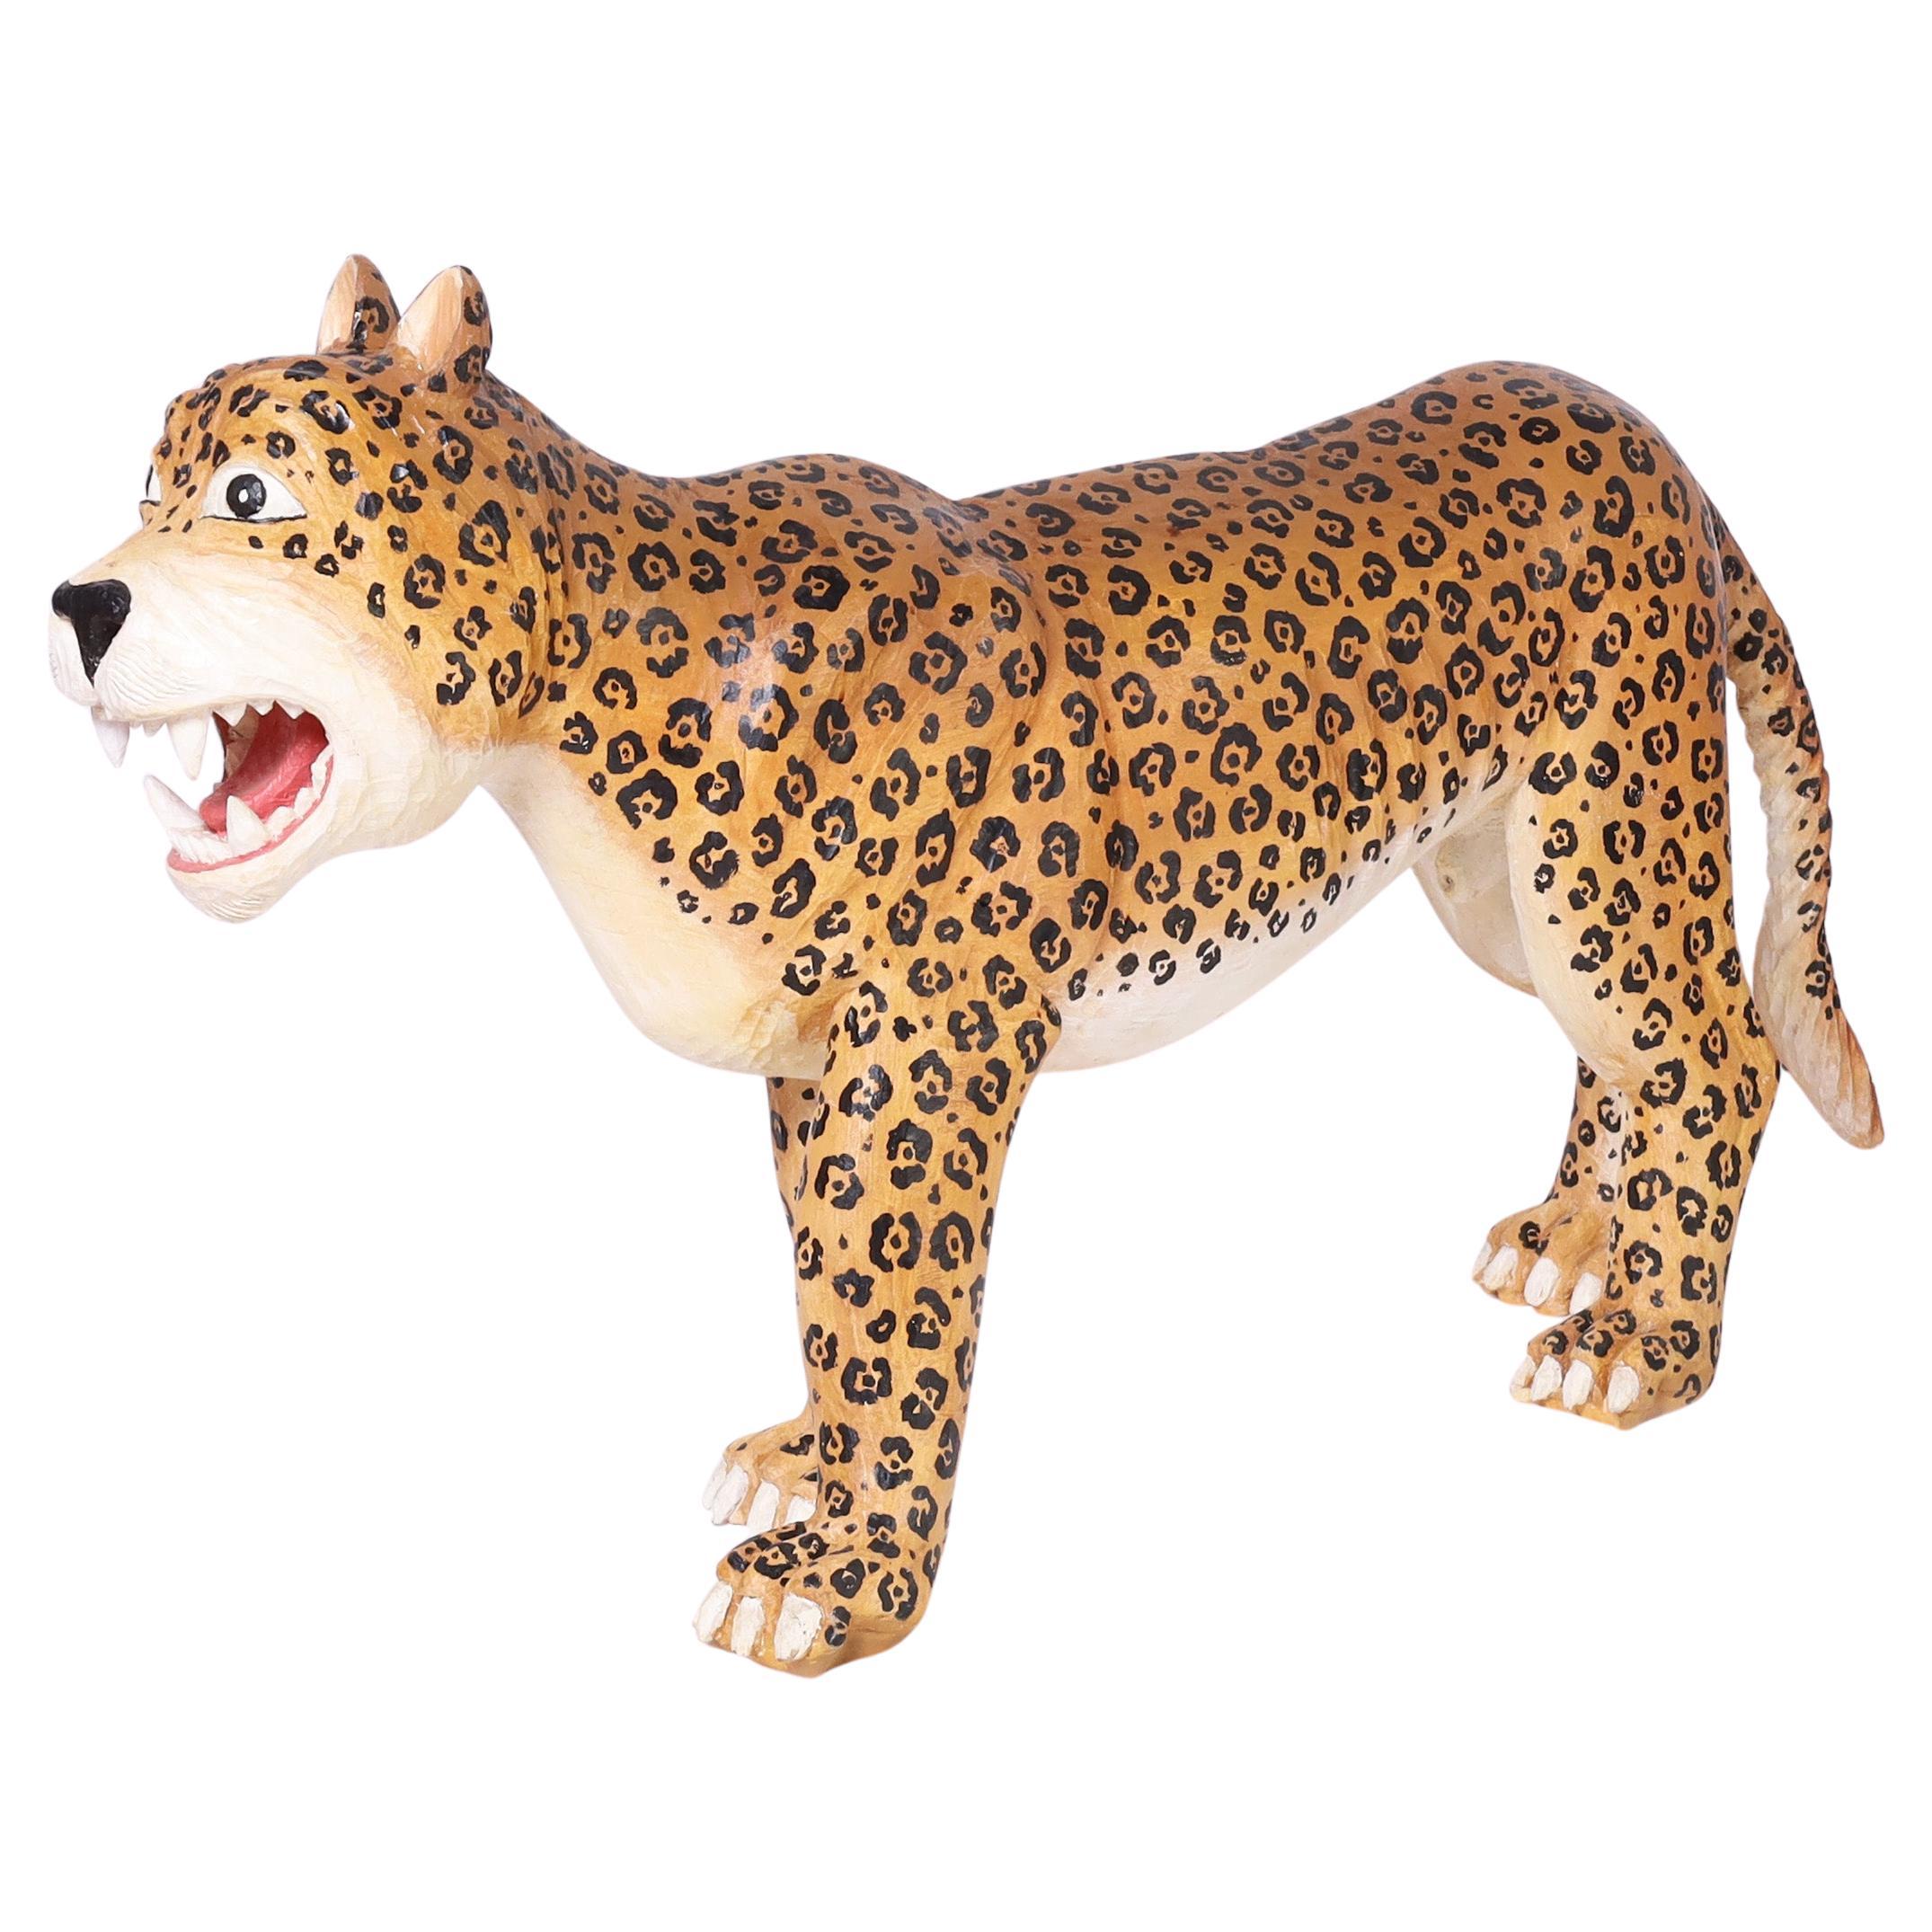 Standout whimsical vintage life size hand carved jaguar decorated with its distinctive rosettes in a faux fierce expression.